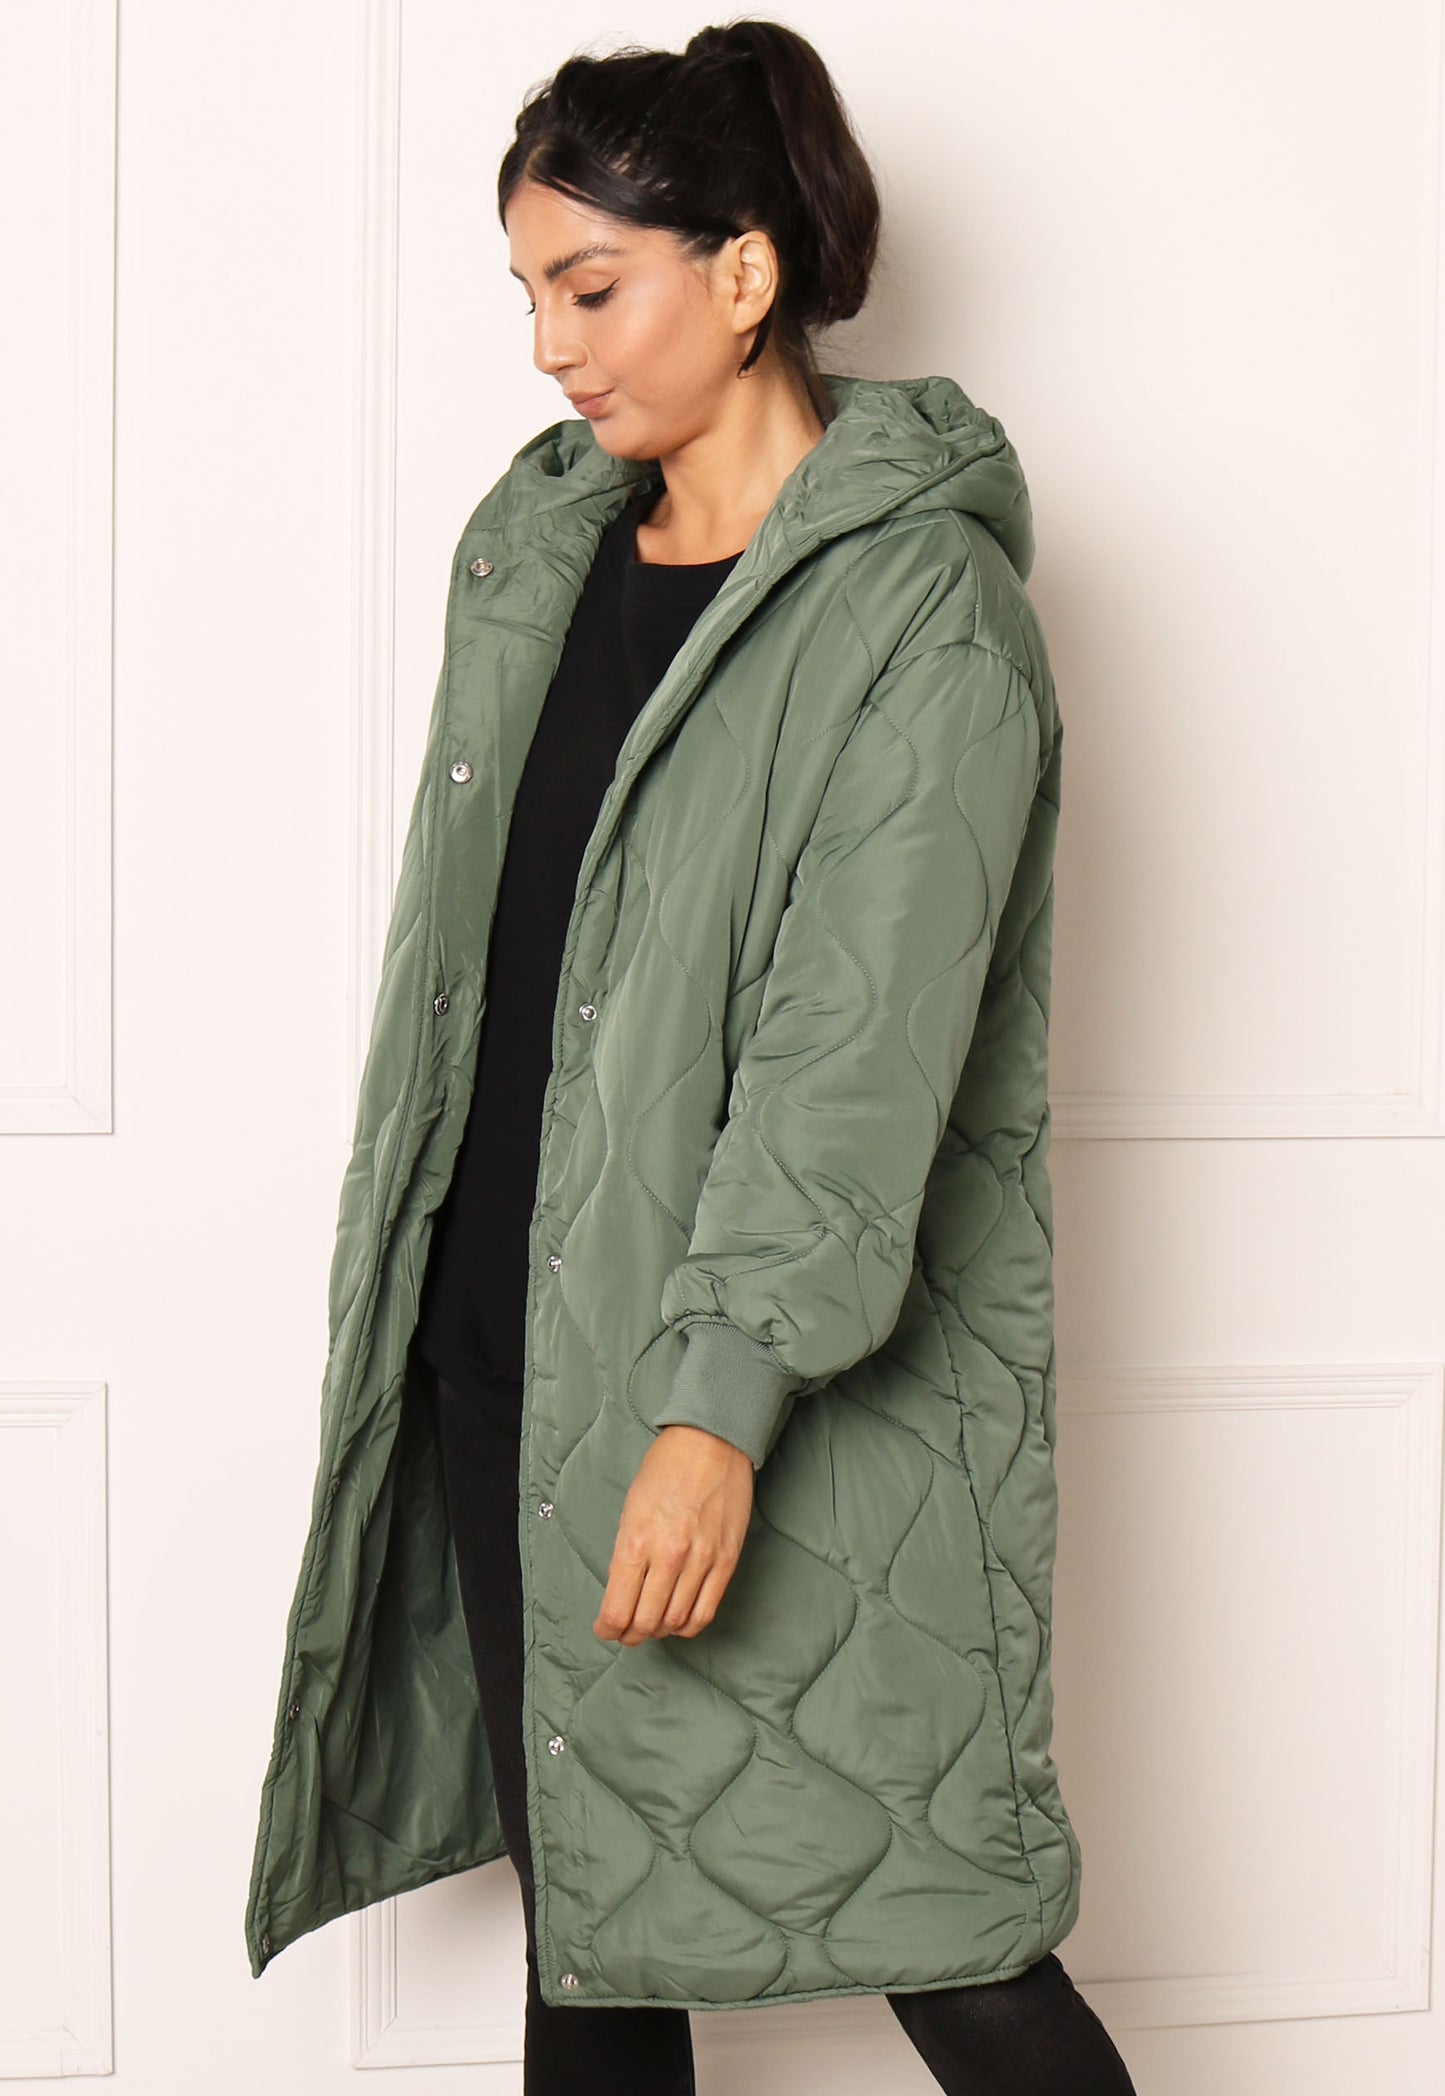 VILA Thora Onion Quilted Midi Coat with Hood in Mid Green - One Nation Clothing